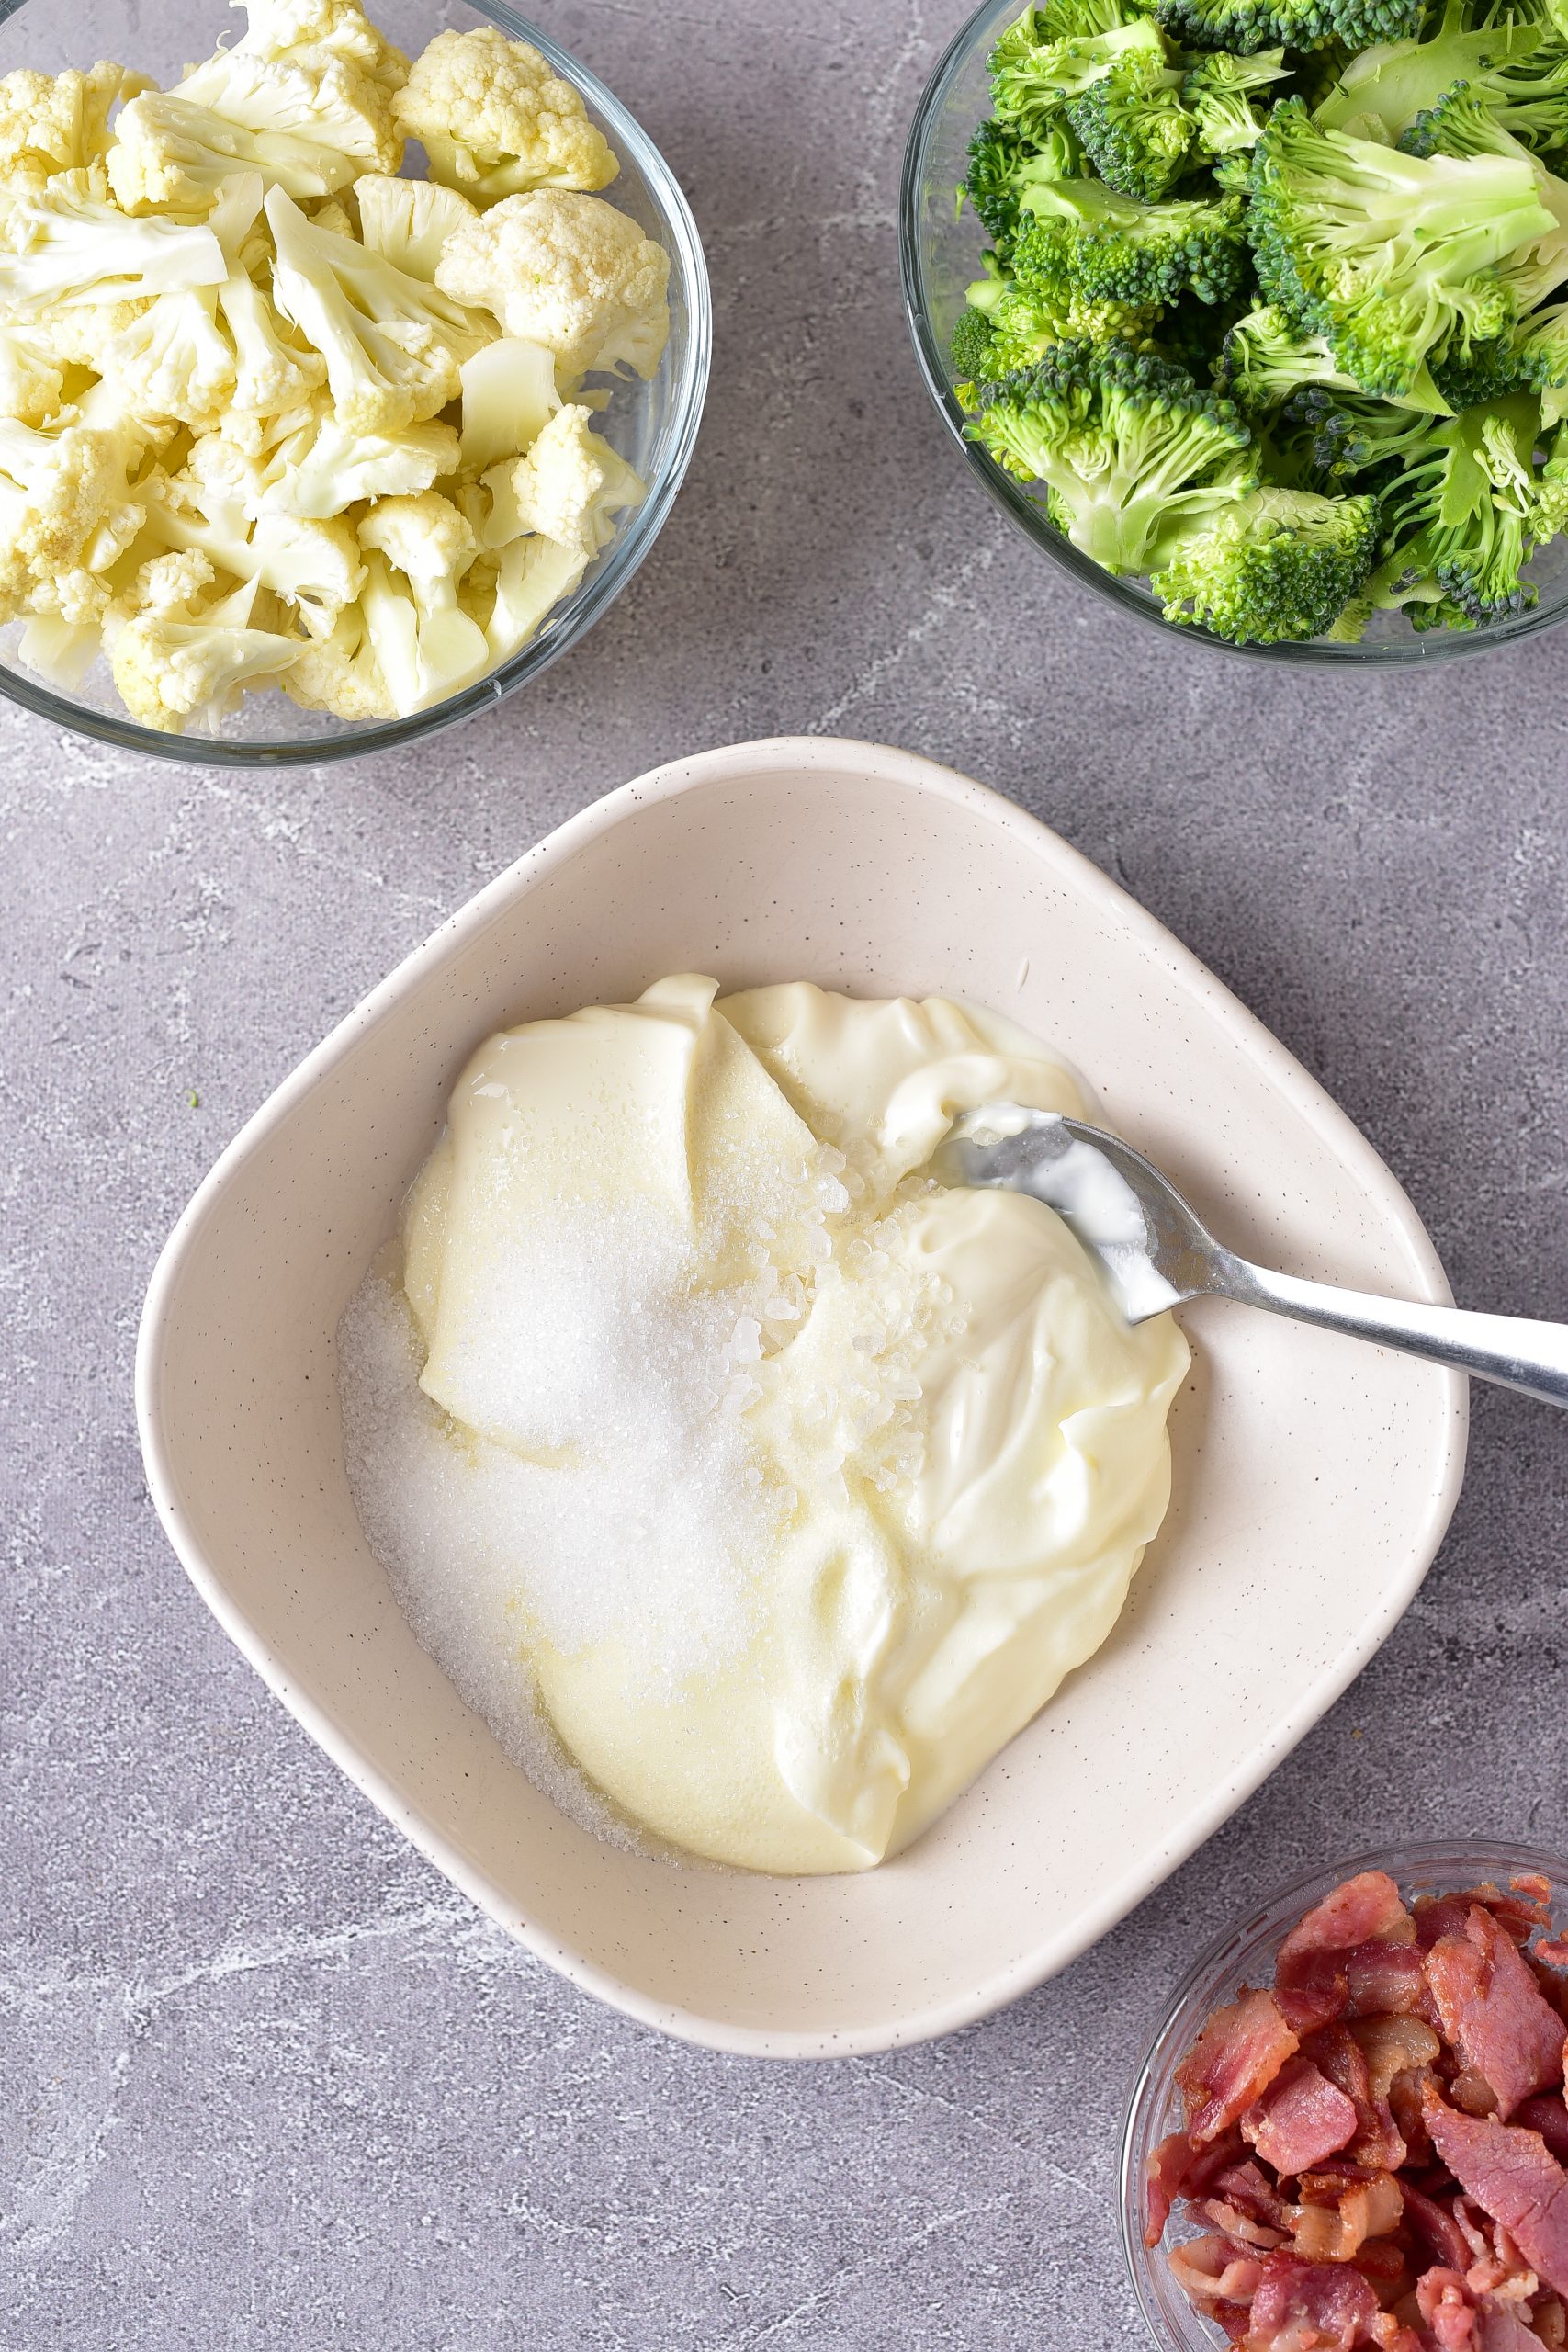 In a small bowl, stir together the sour cream, mayonnaise, sugar, and salt. 